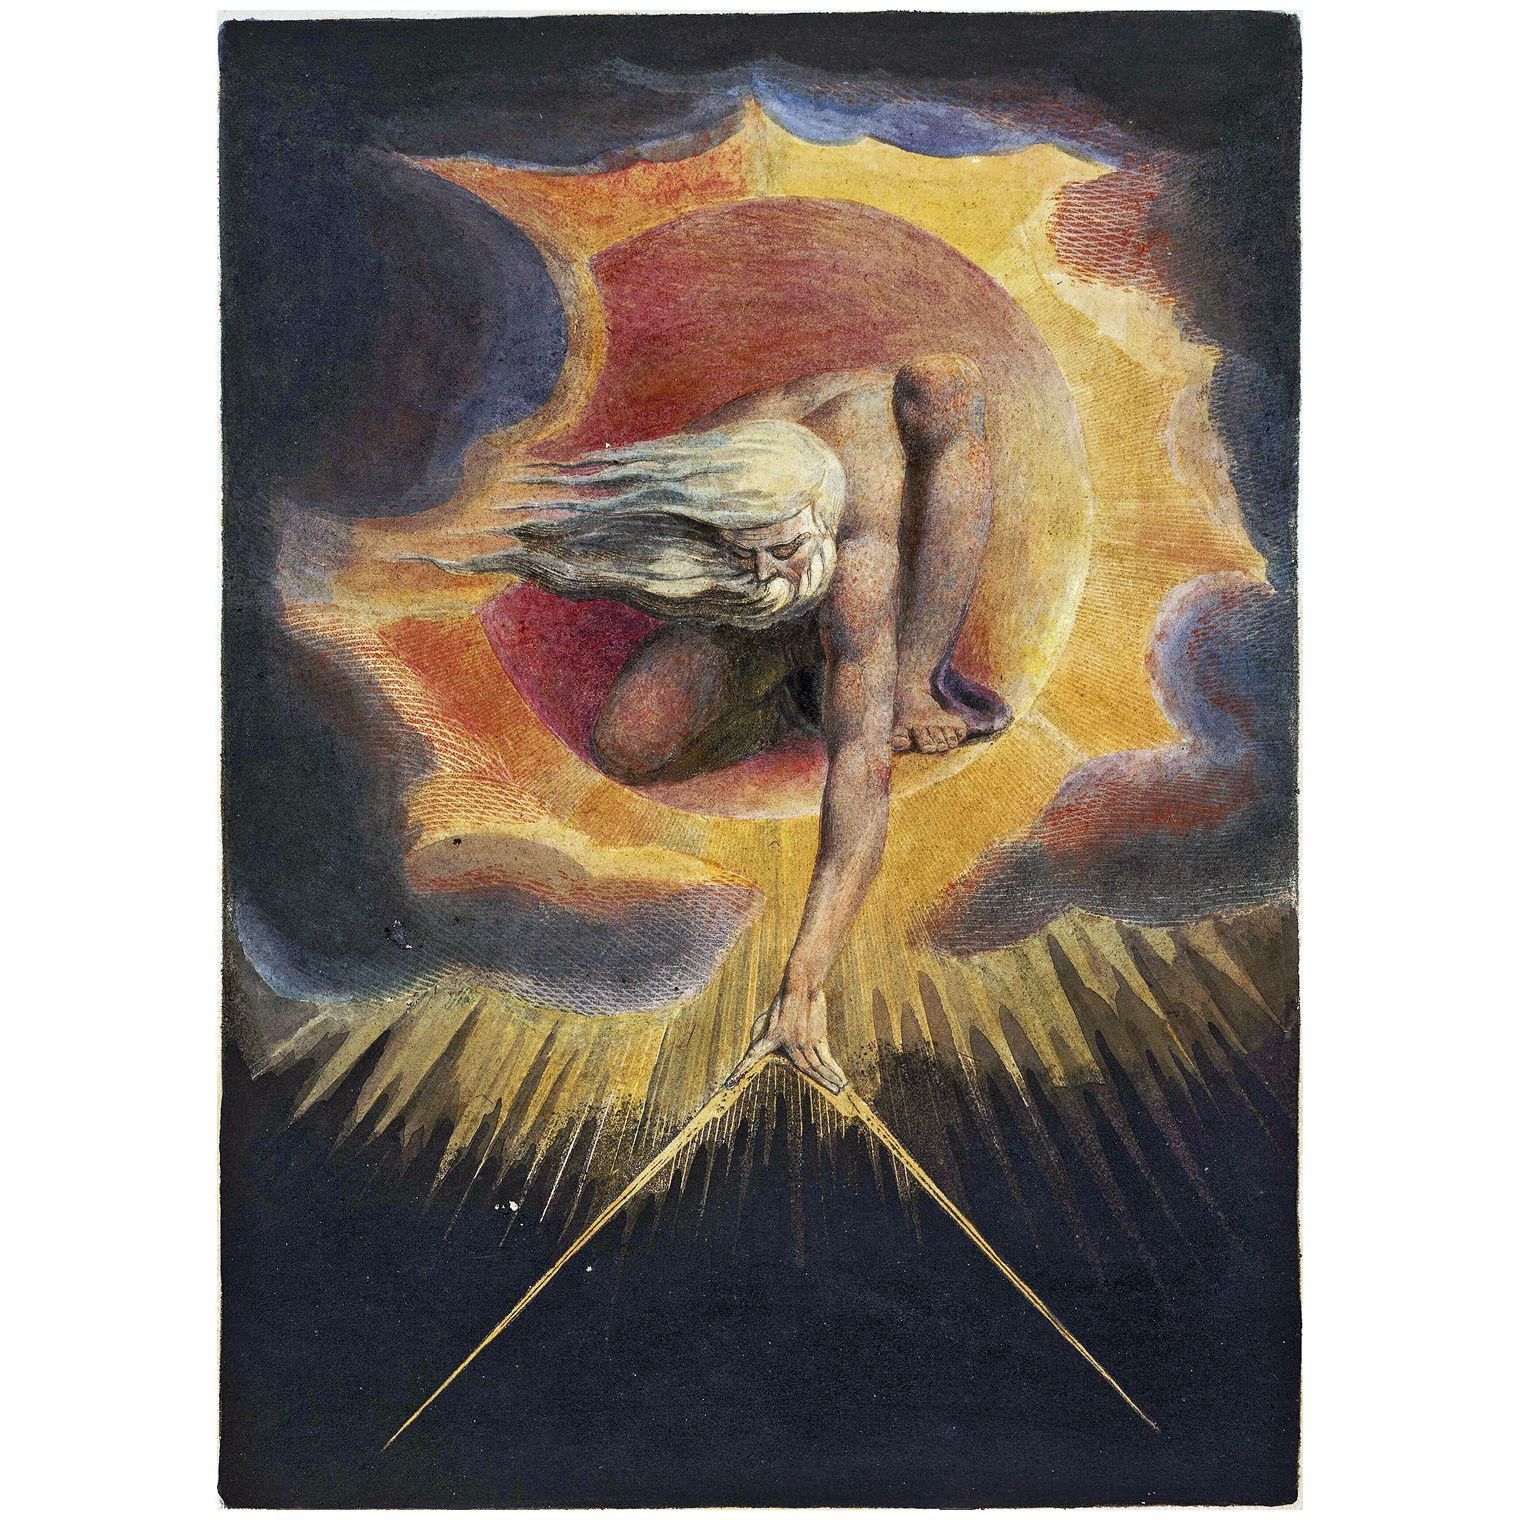 William Blake. Europe a Prophecy. Creation of the World. 1794. British Museum